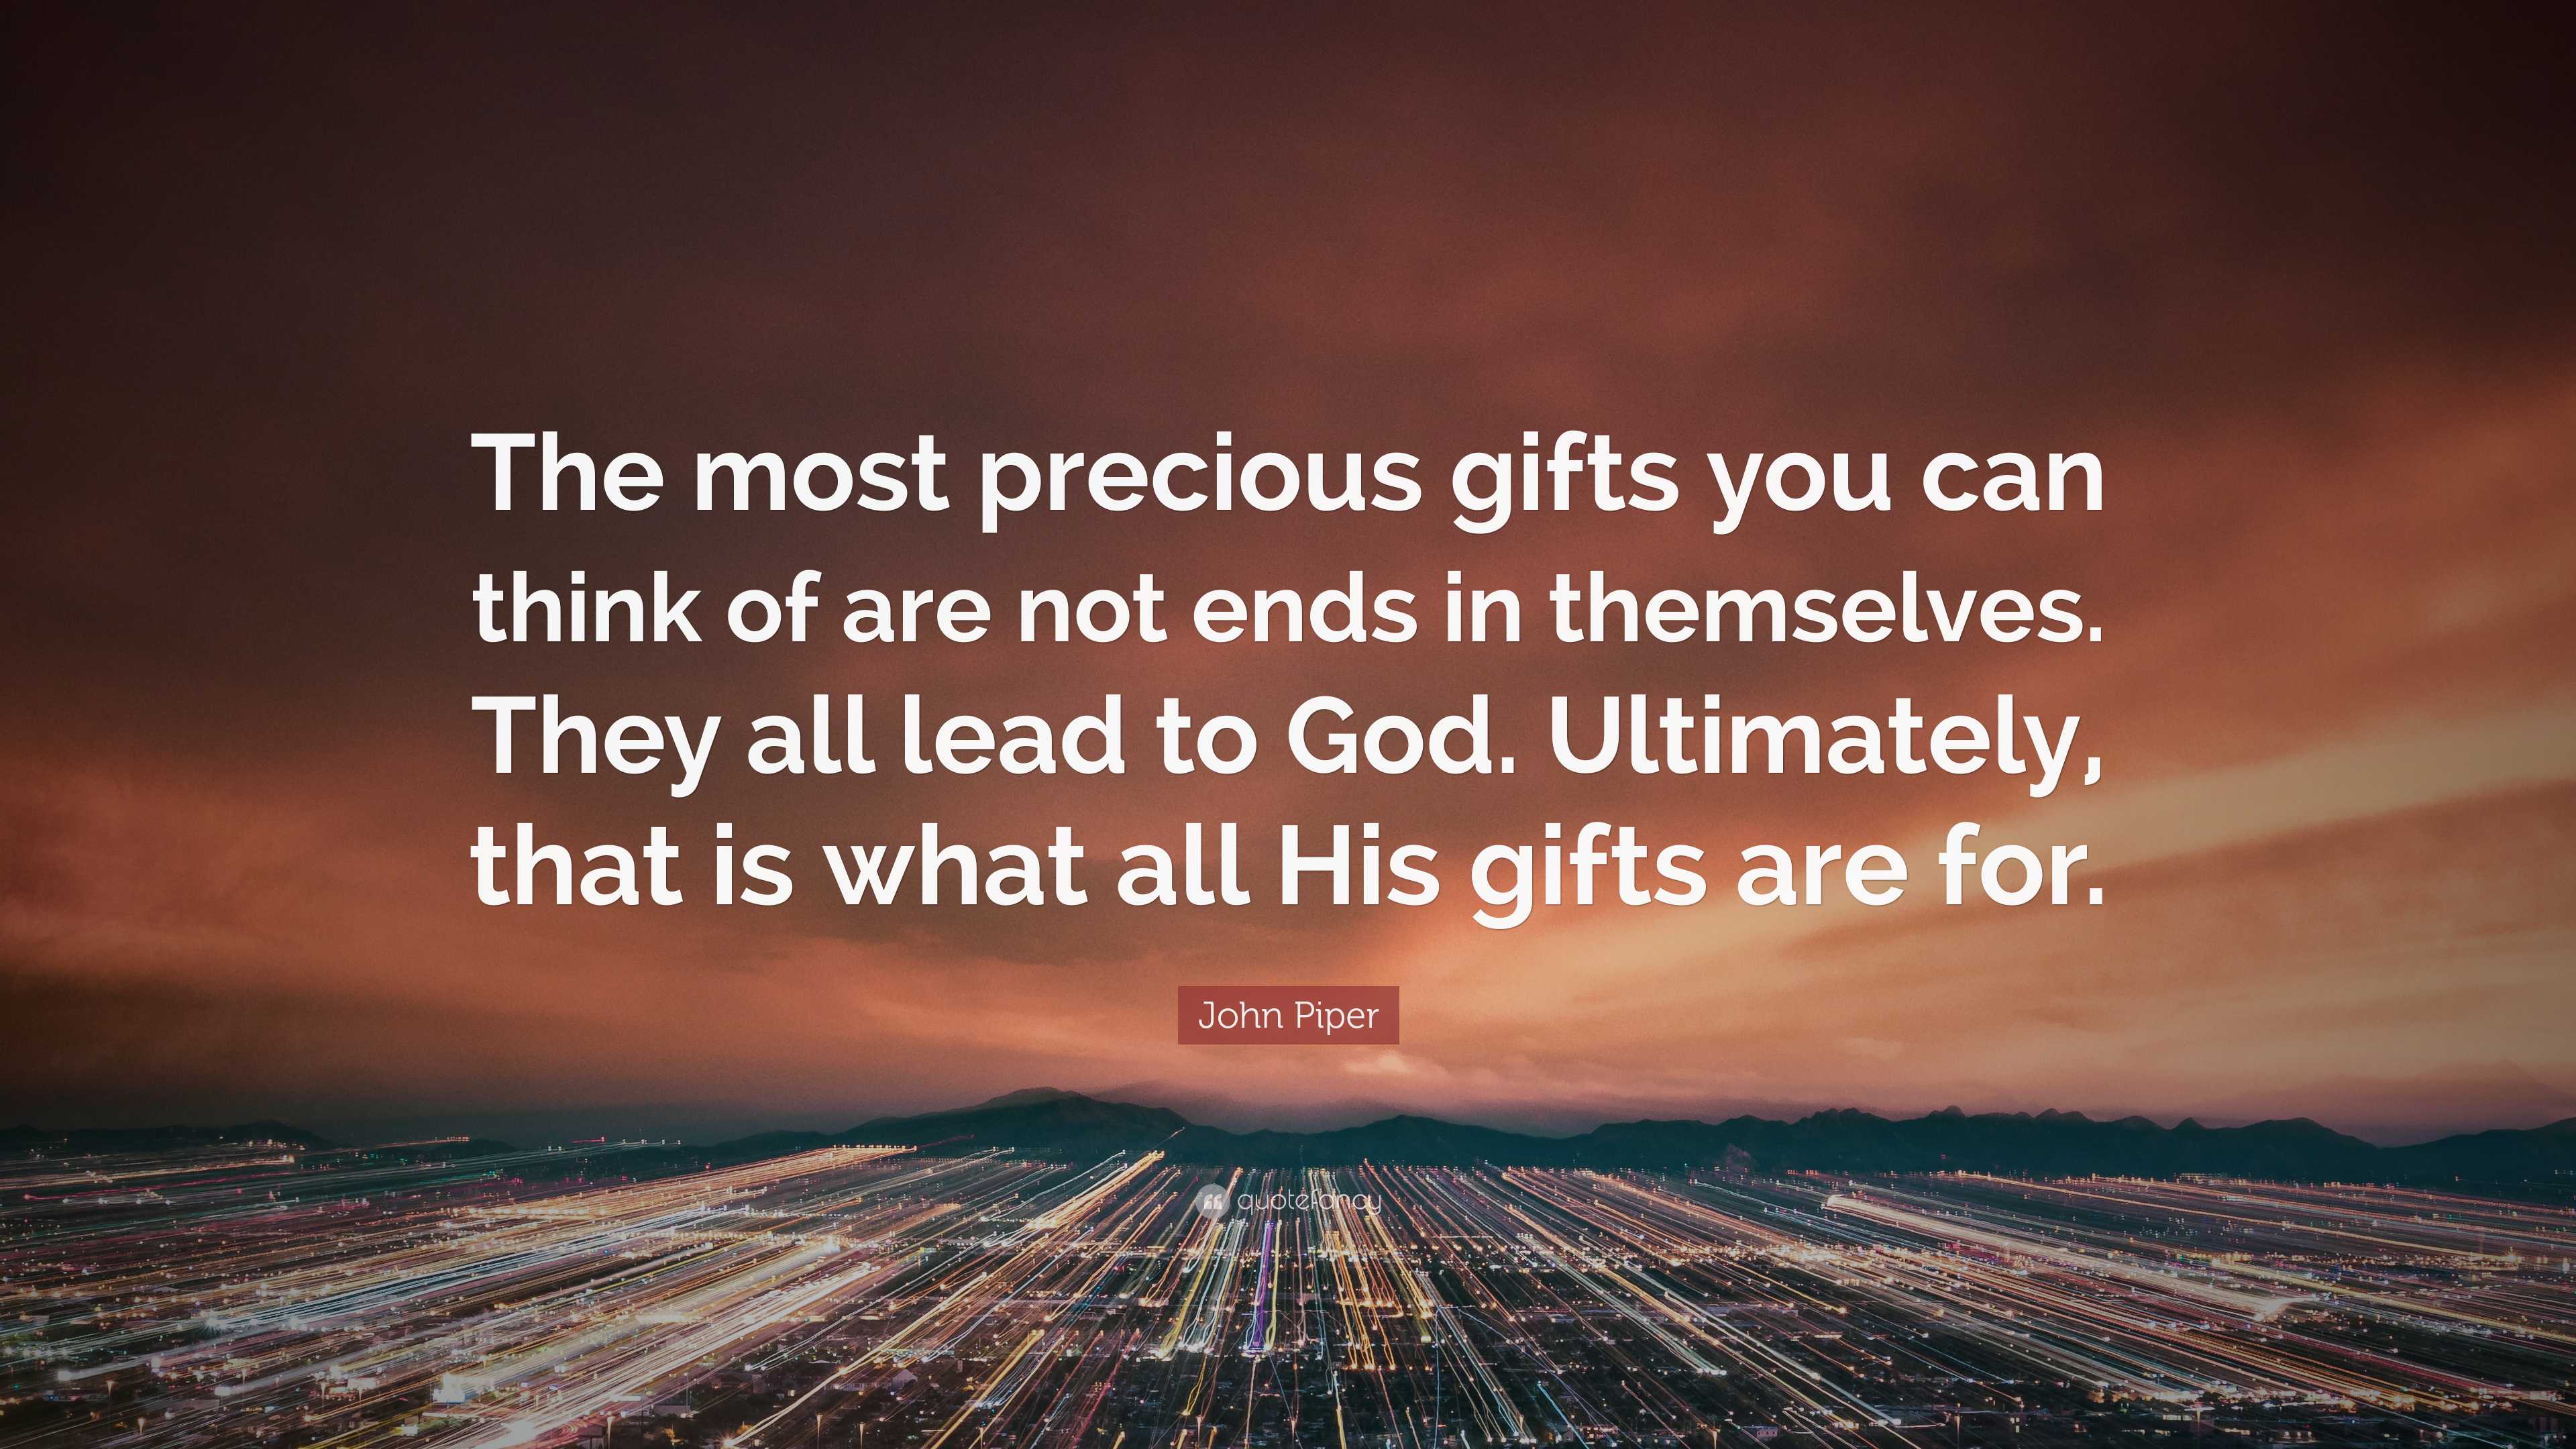 A Precious Gift From God | God is Good!